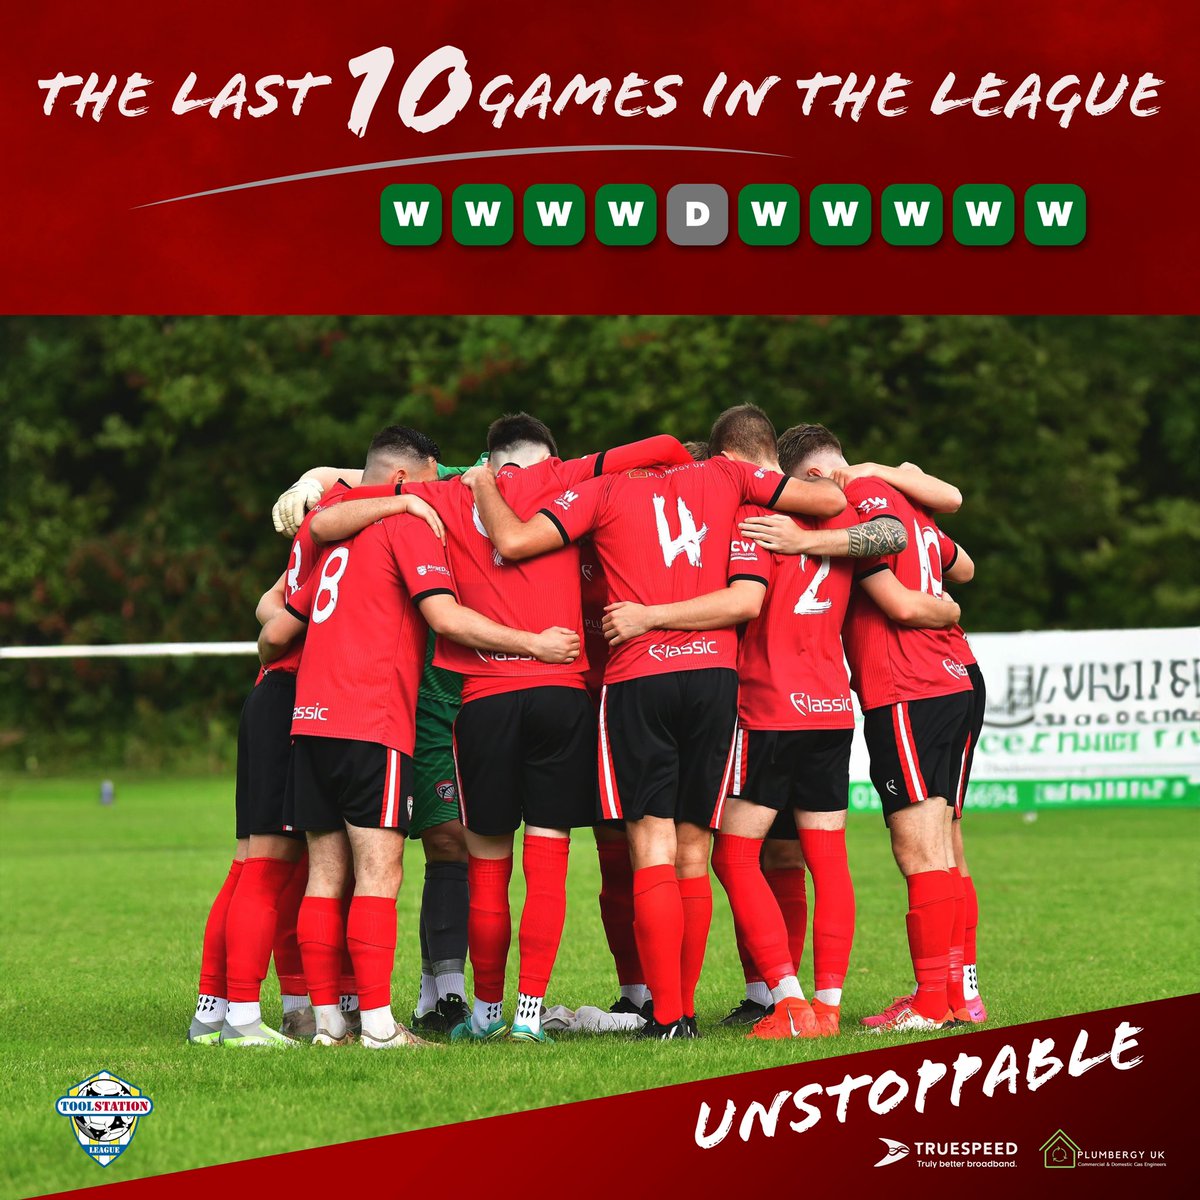 🔴⚫️ The last 10 league games: 9W-1D. We’re on fire and unstoppable! 🔥🚀 Huge shoutout to the fans backing us throughout this journey. #UpTheMiners #UnstoppableRun